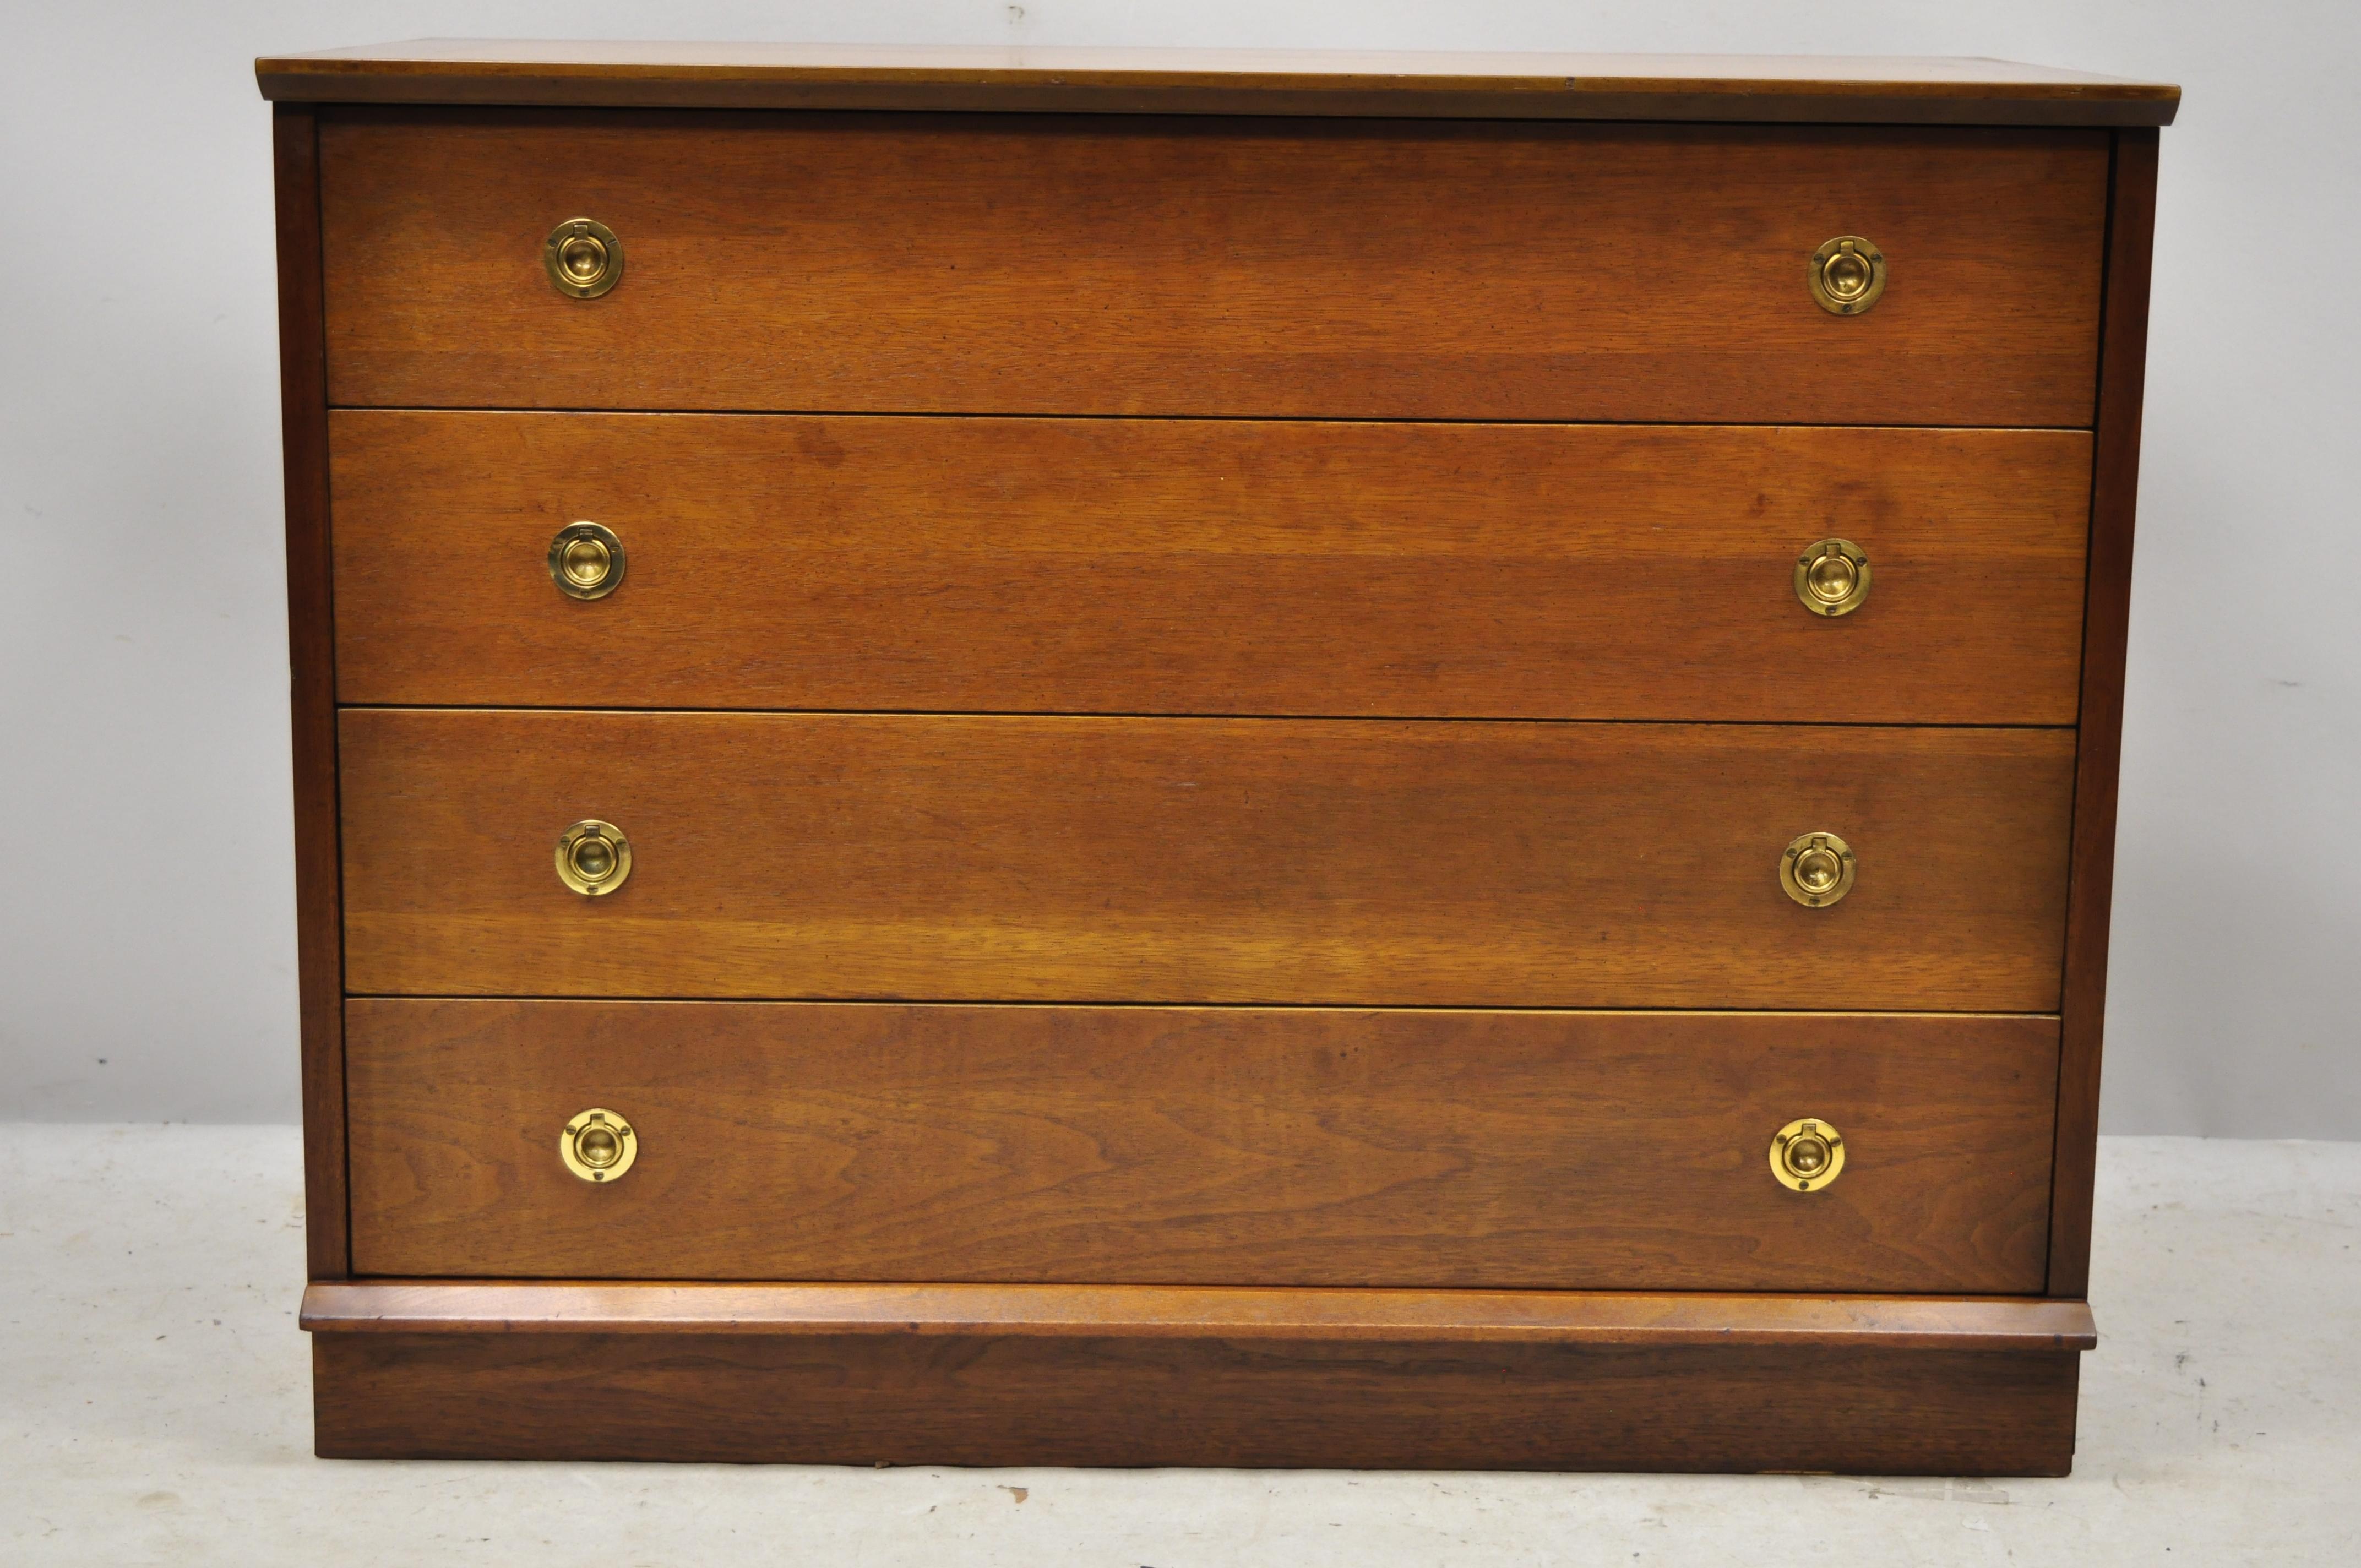 Vintage Mid-Century Modern walnut 4-drawer campaign style brass pulls bachelor chest dresser. Item features inset brass campaign style drawer pulls, angled and stapled front and rear edge, beautiful wood grain, 4 dovetailed drawers, clean modernist